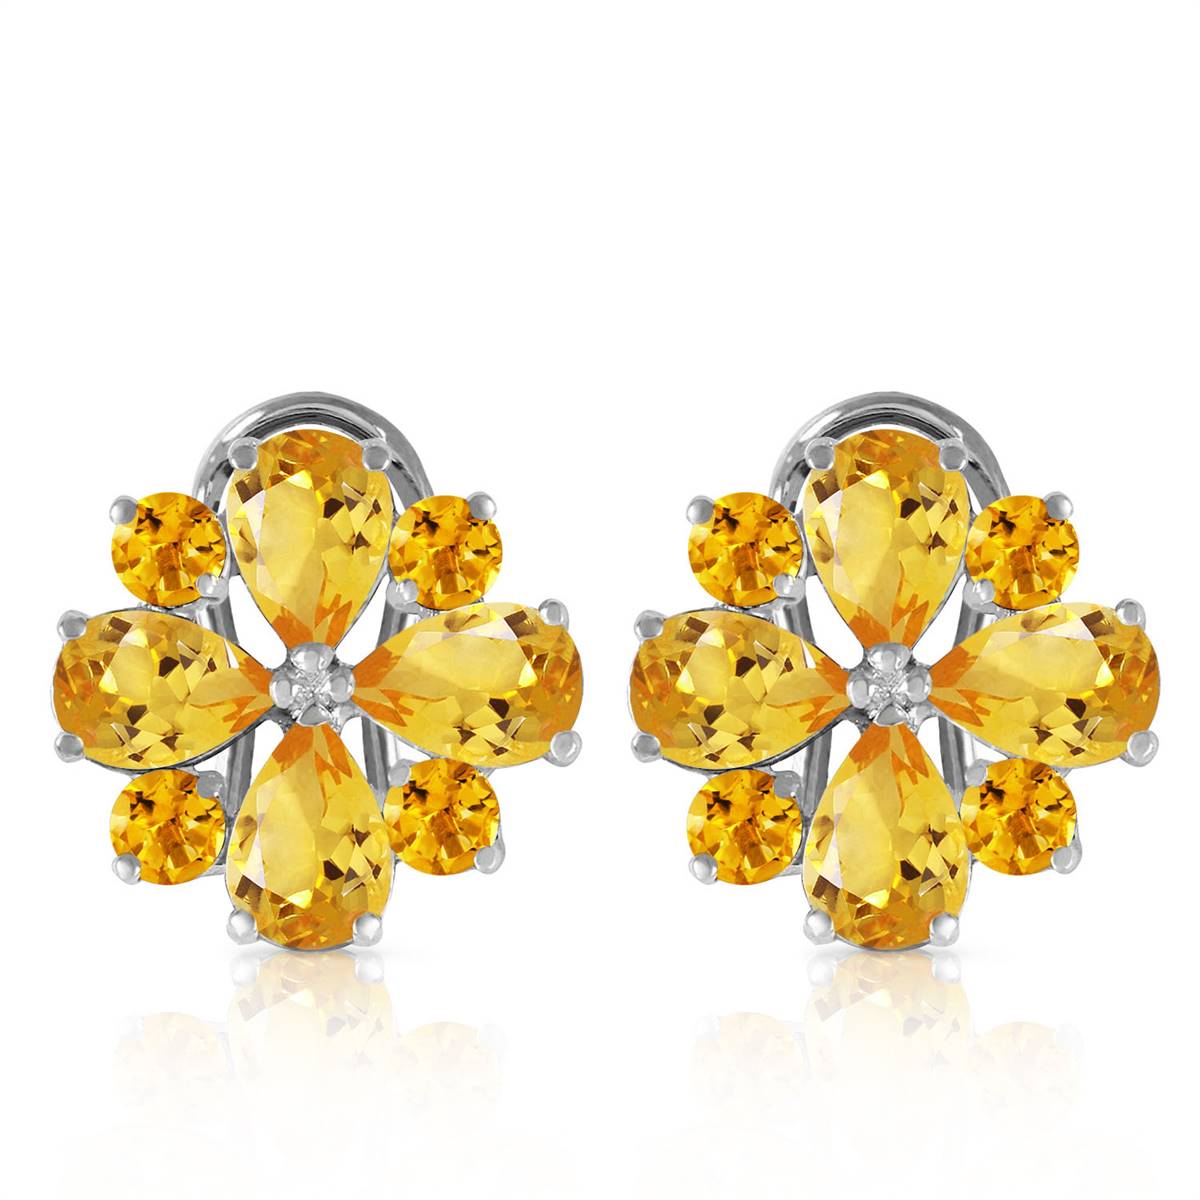 4.85 Carat 14K Solid White Gold Love Accents Citrine Earrings